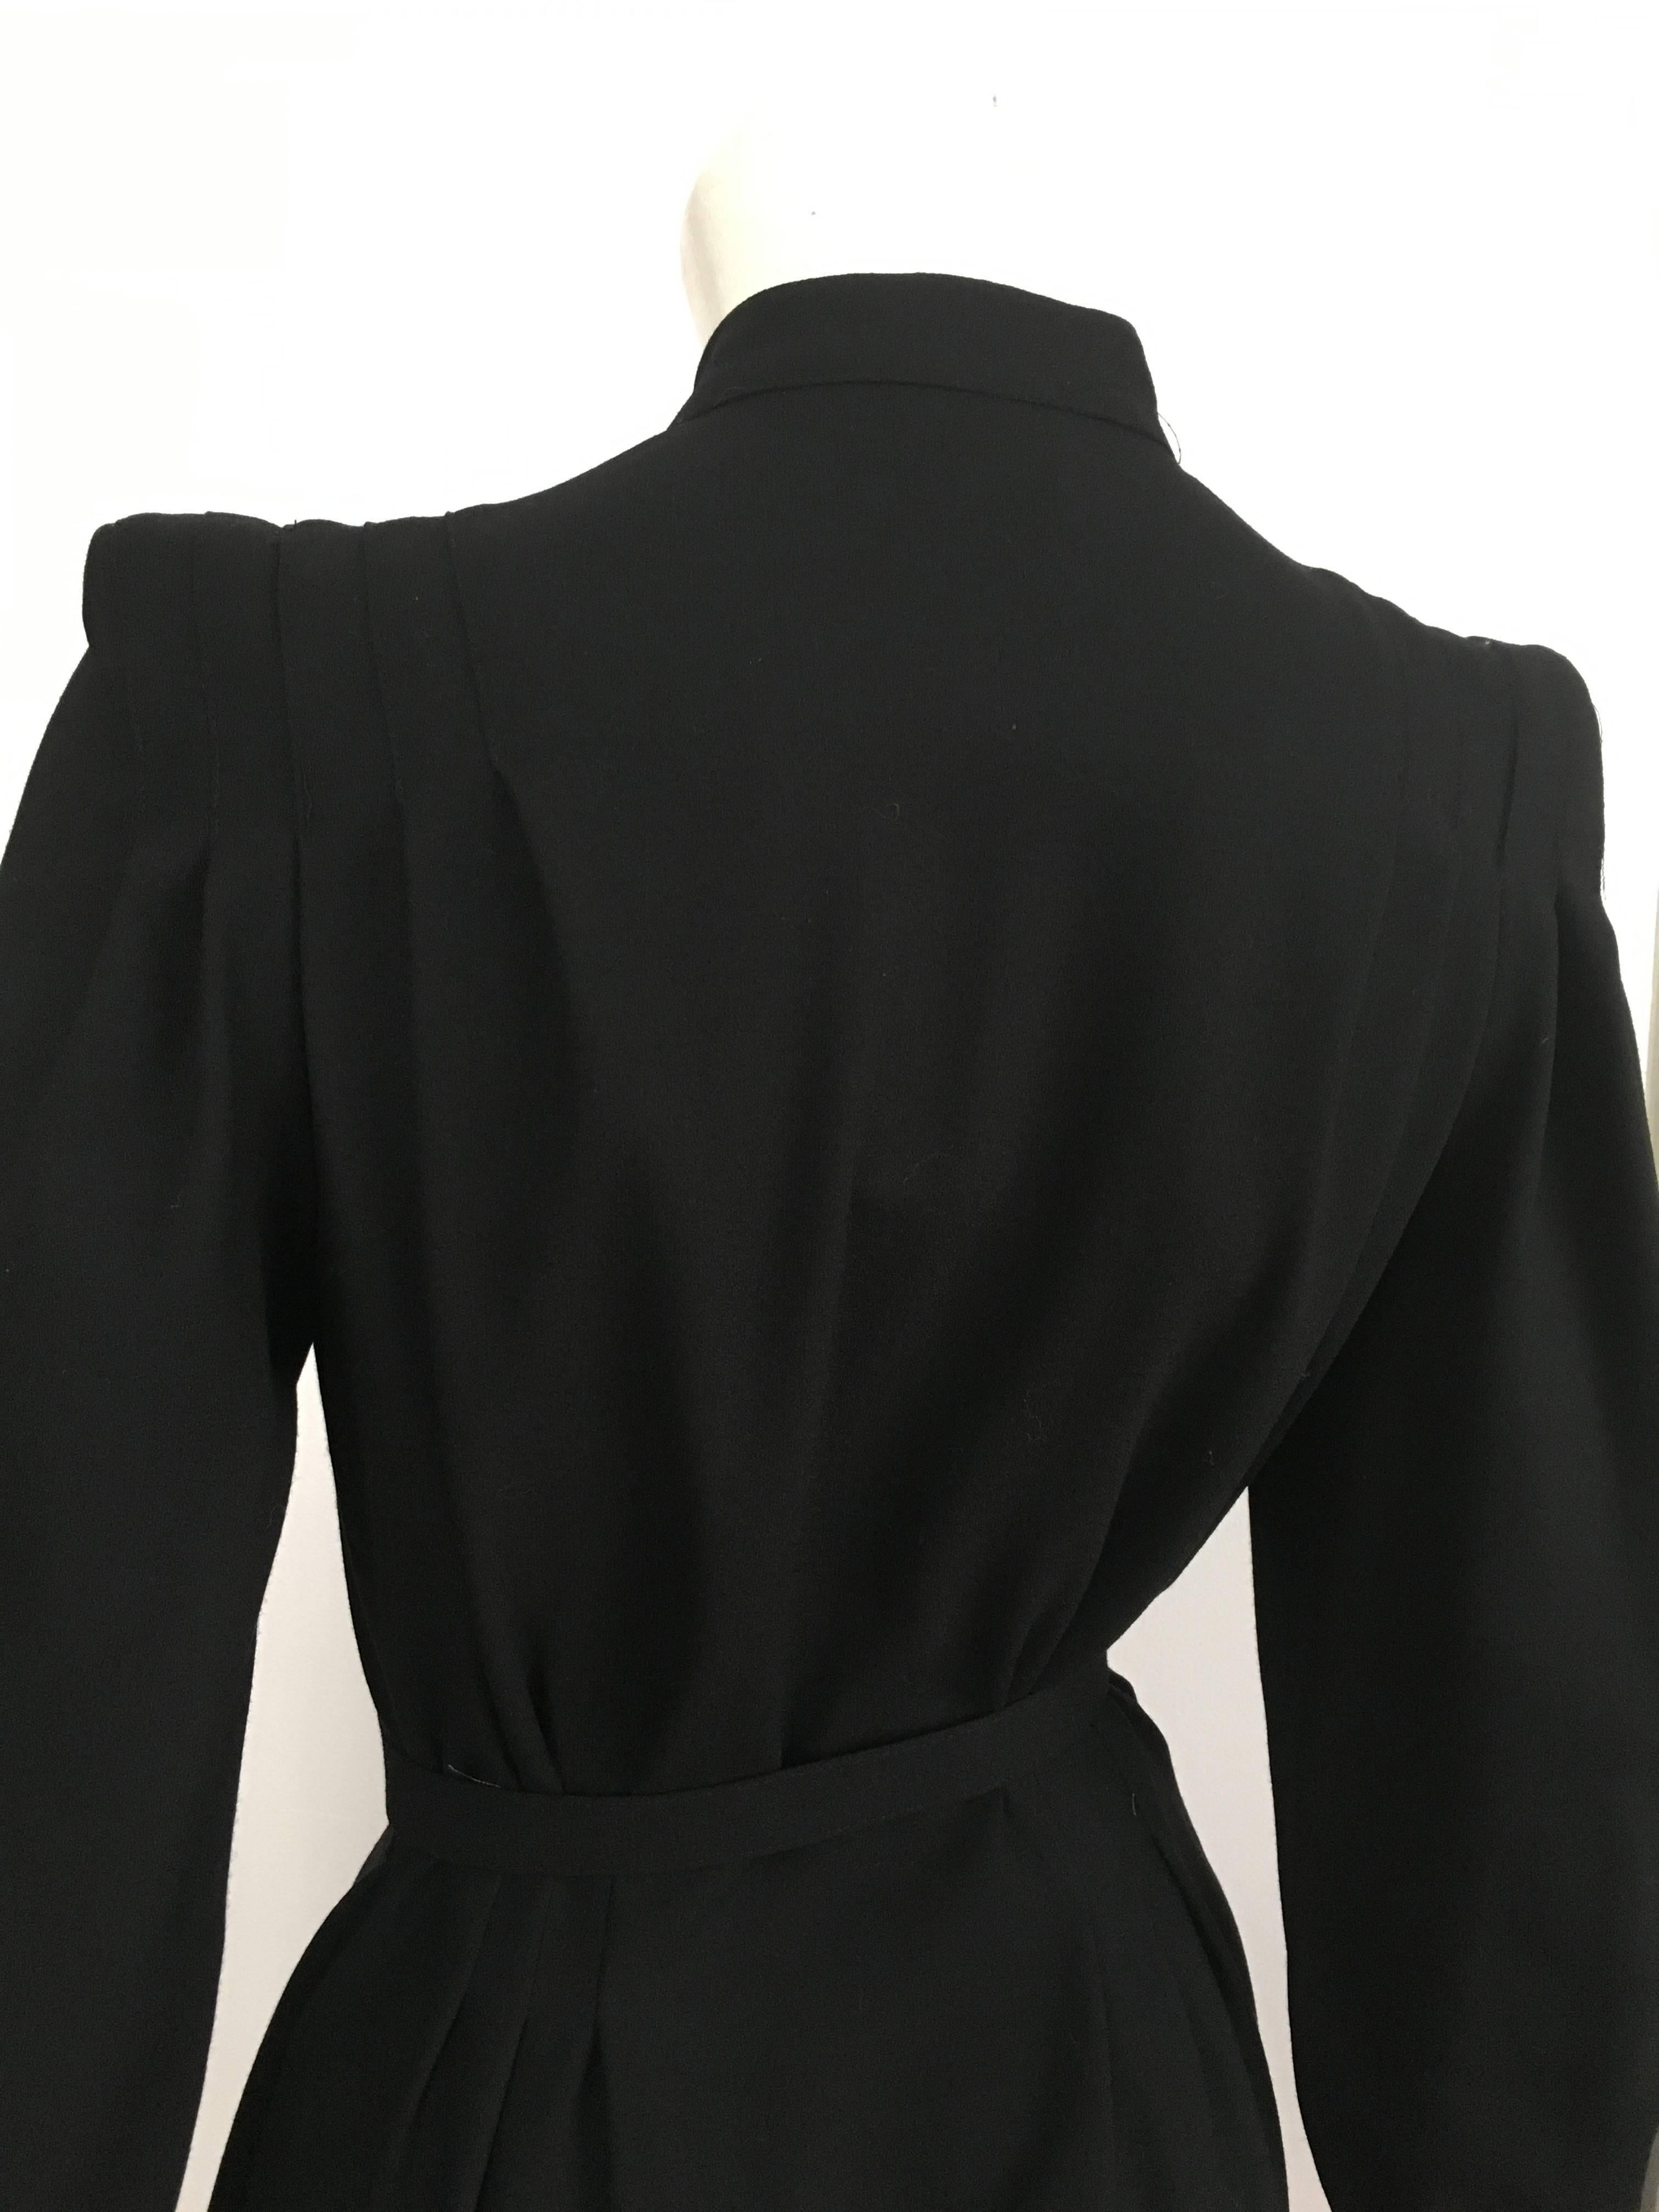 Pierre Cardin 1980s Black Wool Button Up Dress with Pockets Size 6/8. 2